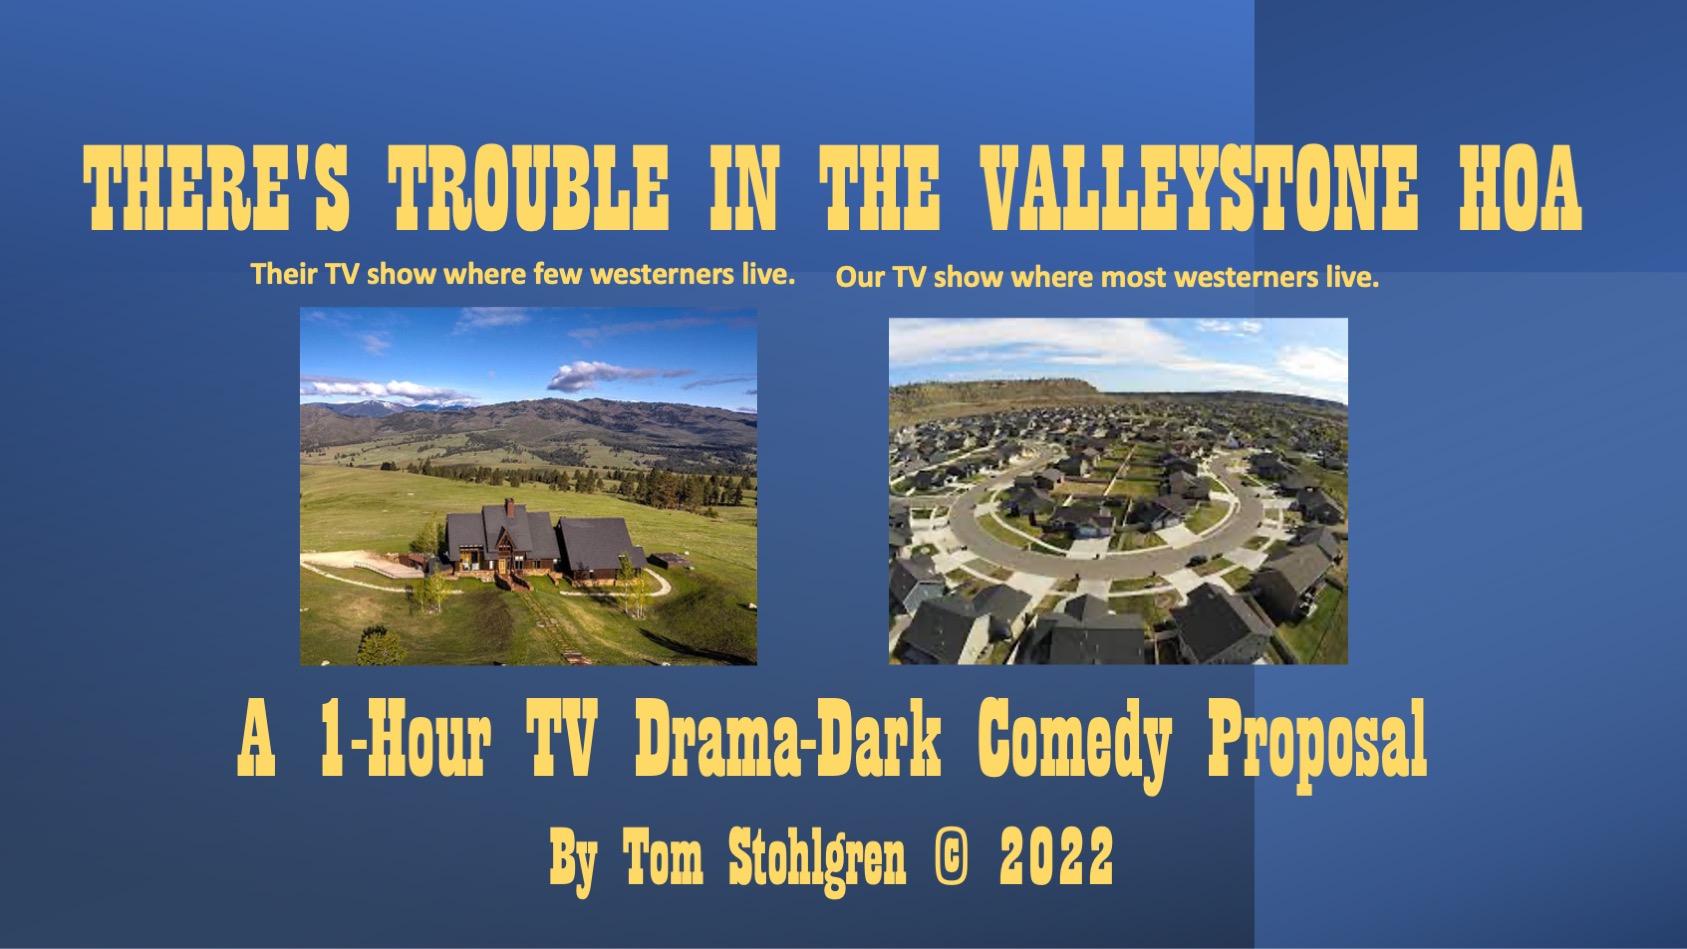 THERE'S TROUBLE IN THE VALLEYSTONE HOA (1-HR DARK COMEDY)